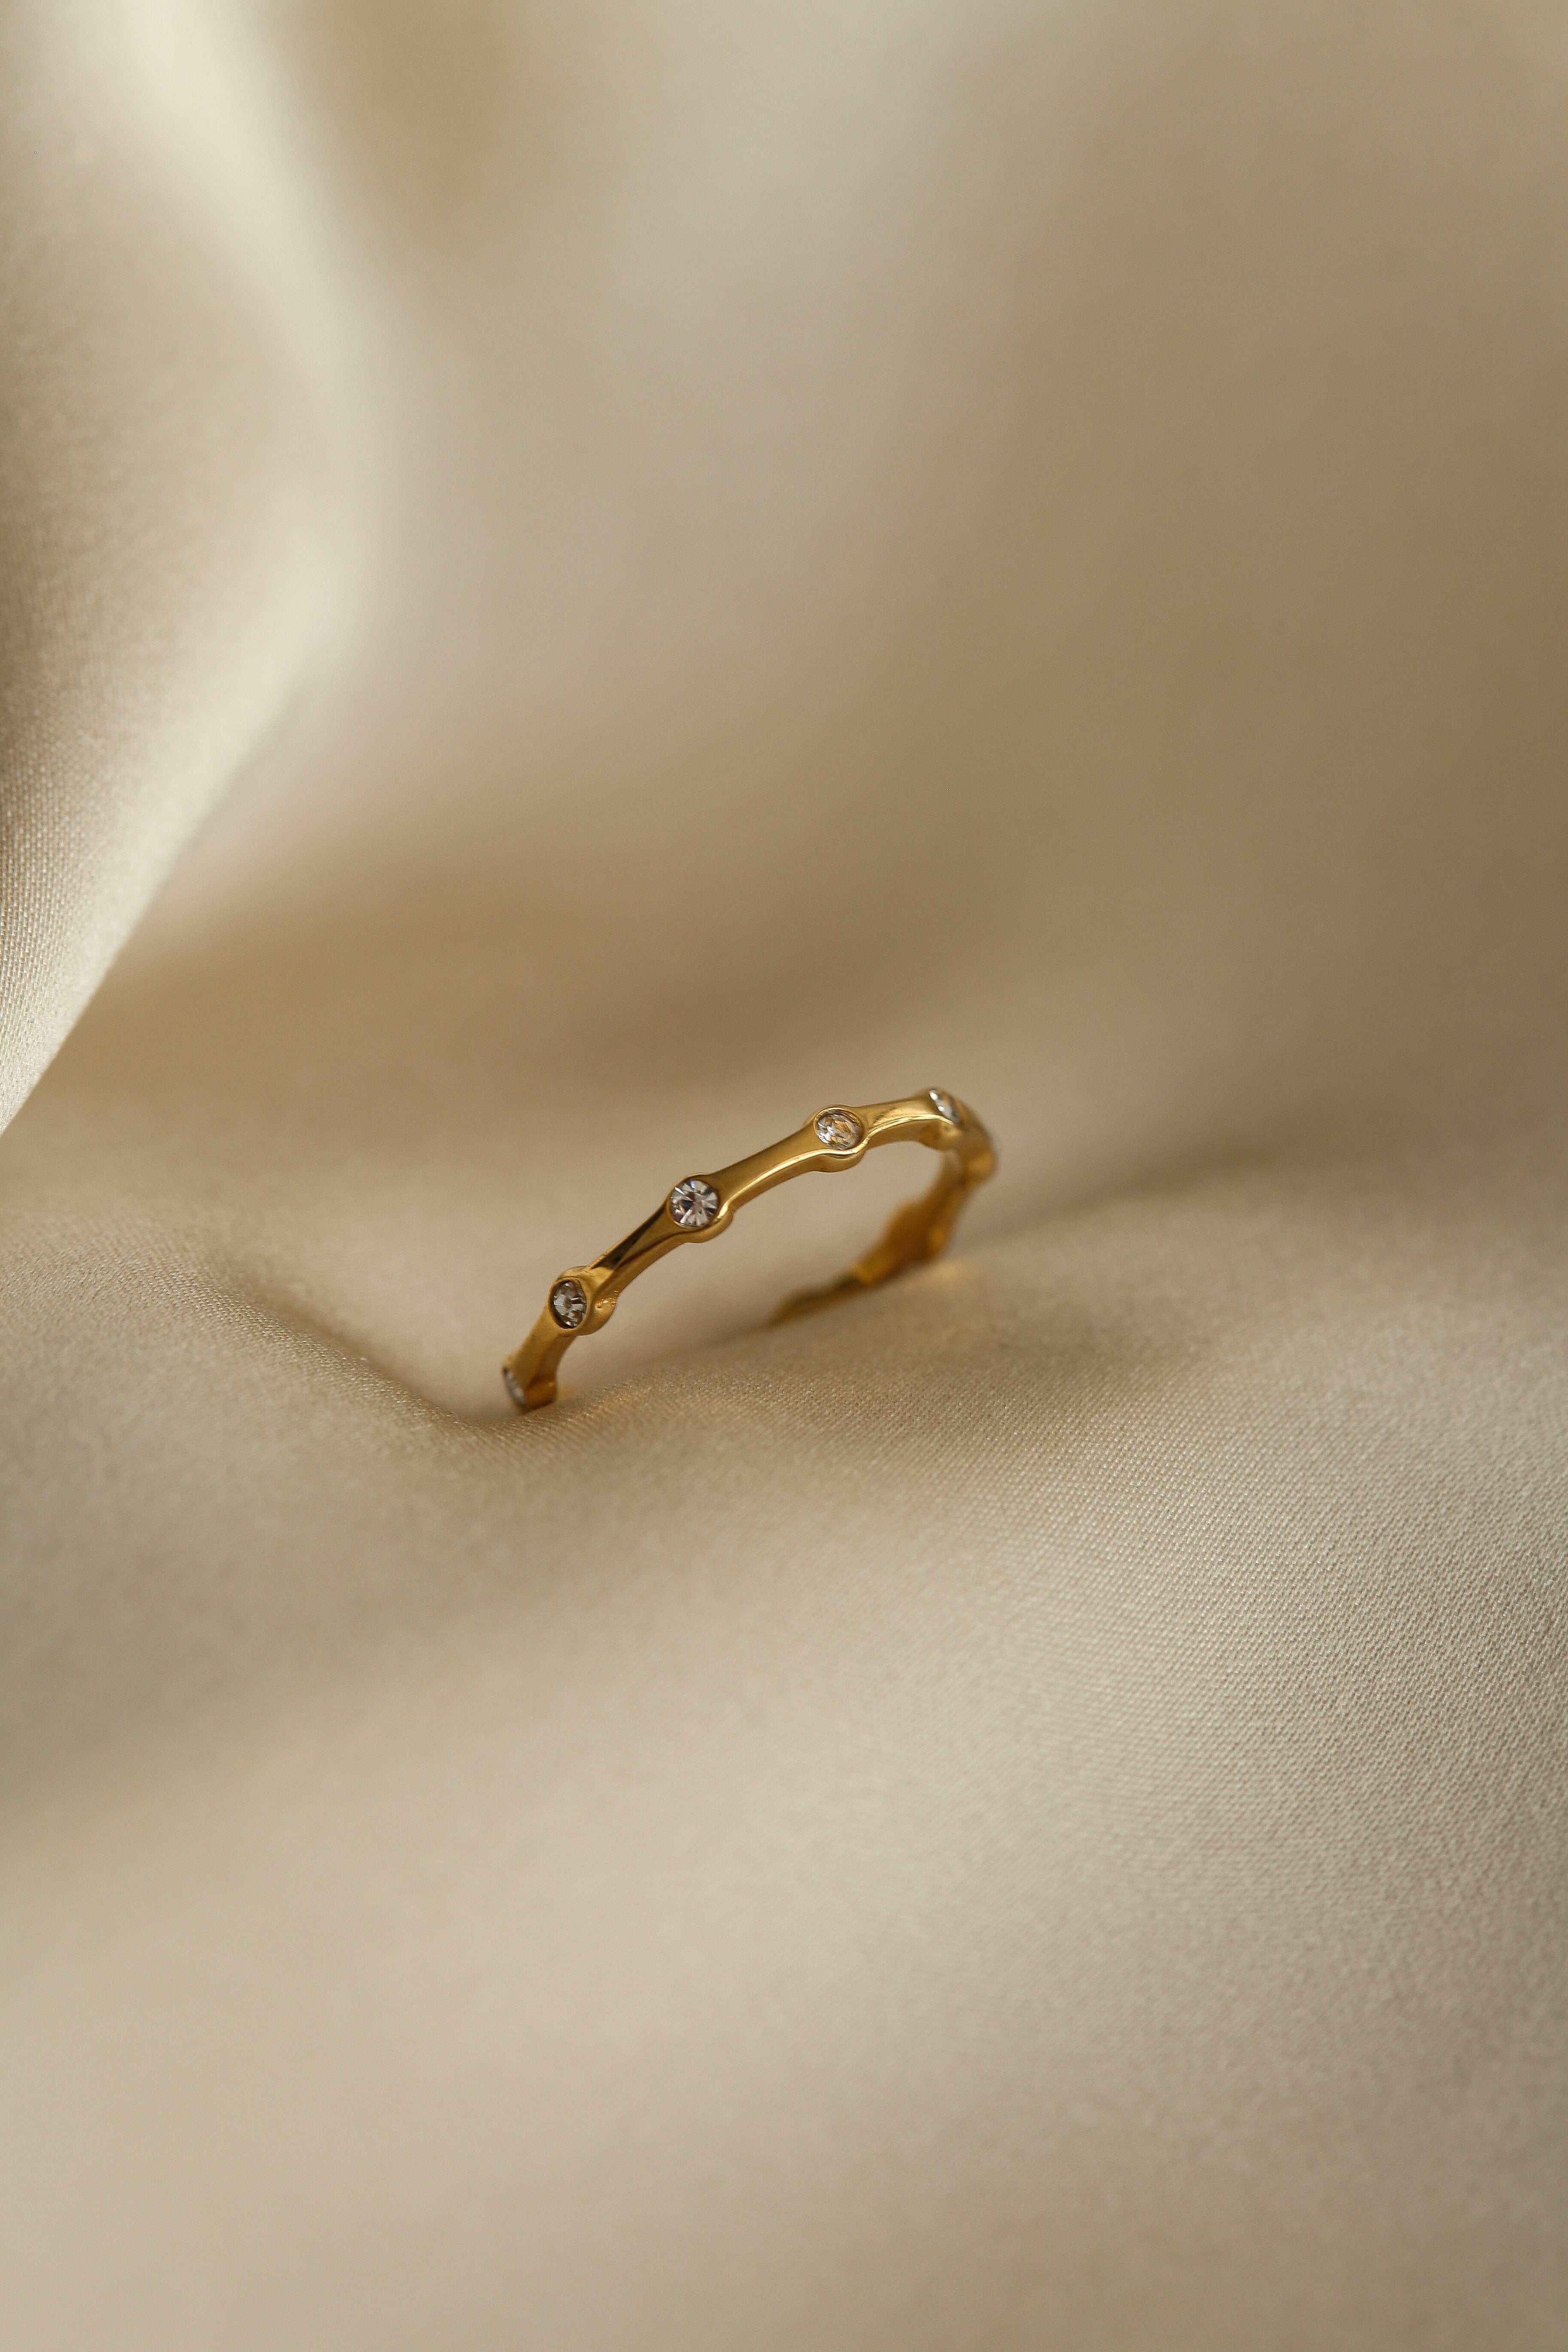 Henrietta Ring - Boutique Minimaliste has waterproof, durable, elegant and vintage inspired jewelry